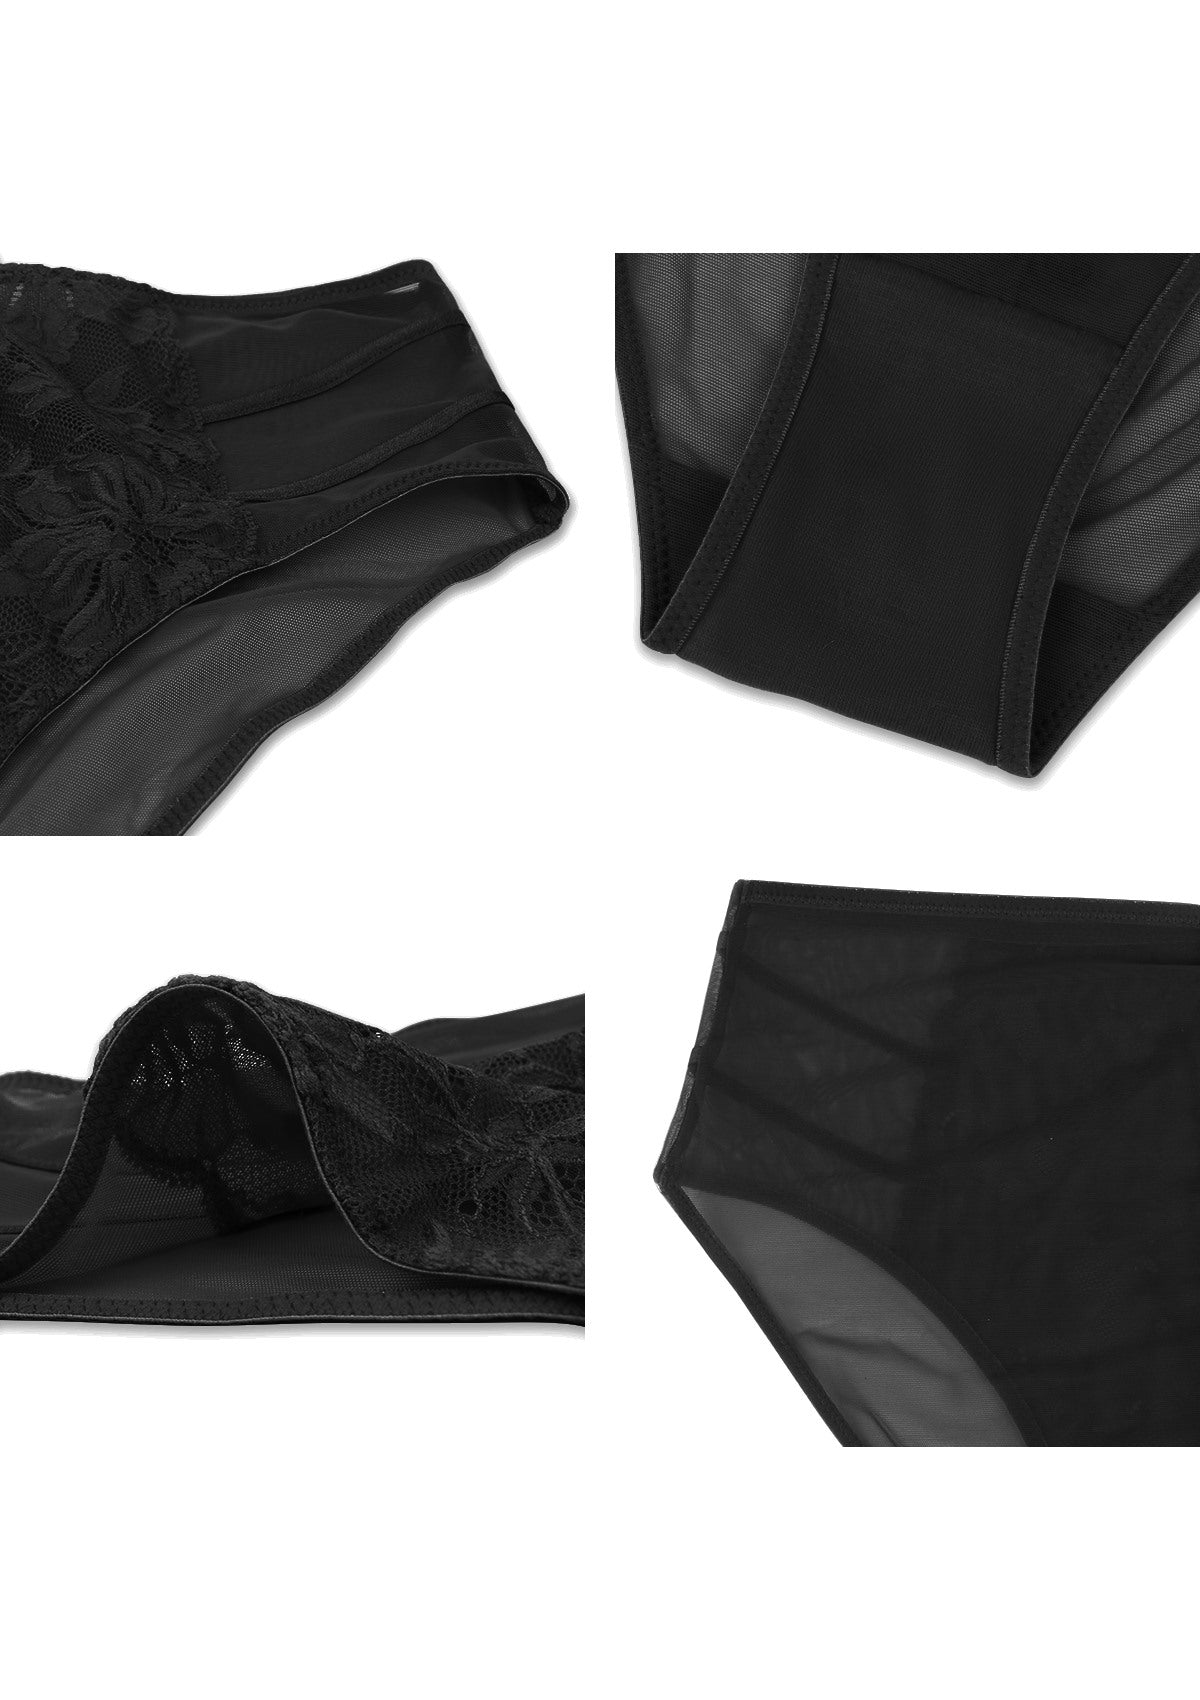 HSIA Spring Romance High-Rise Floral Lacy Panty-Comfort In Style - M / Black